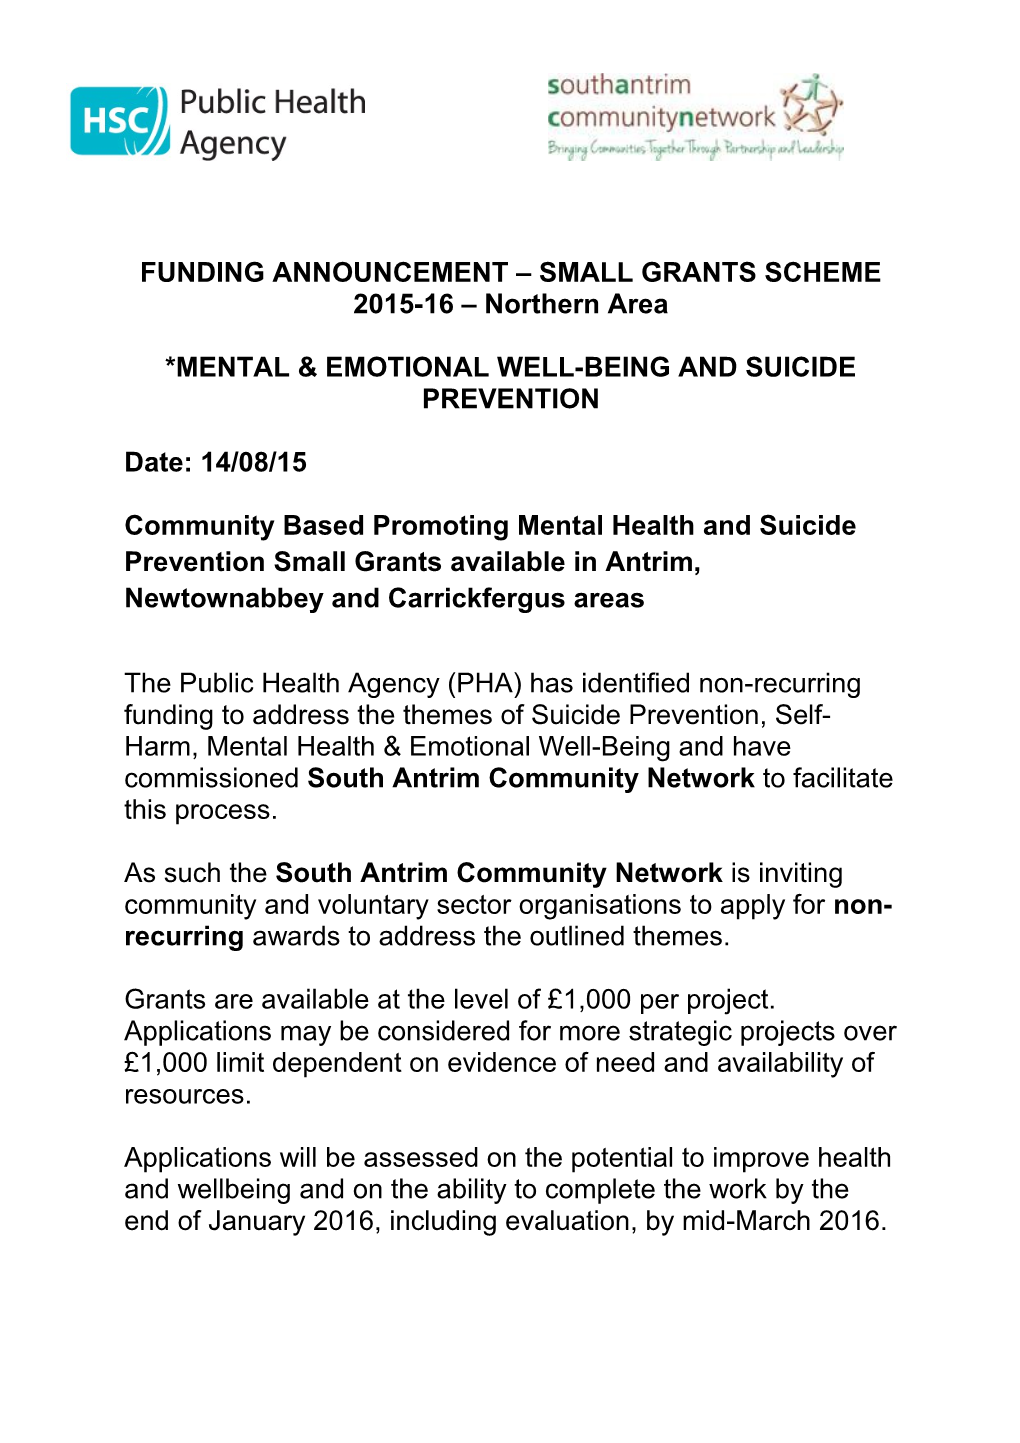 FUNDING ANNOUNCEMENT SMALL GRANTS SCHEME 2015-16 Northern Area